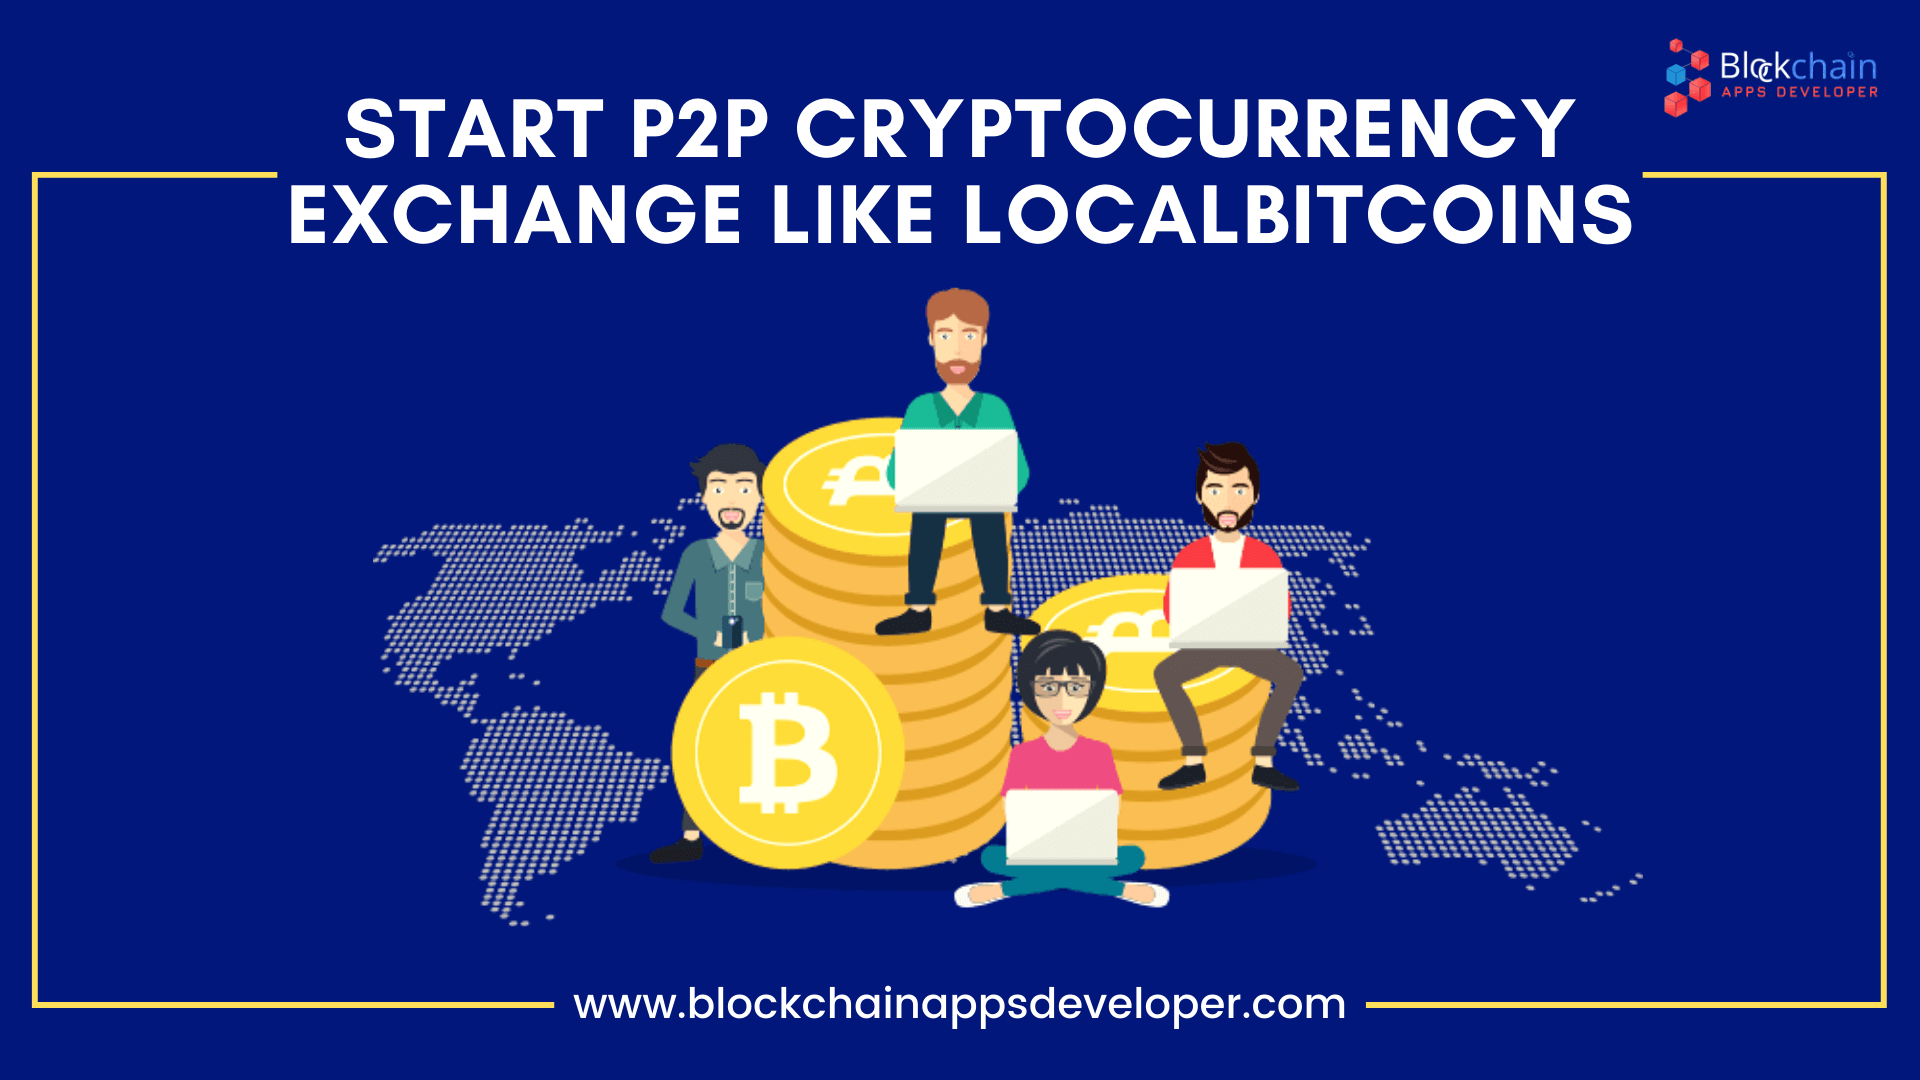 Article about Start your own robust exchanges like Localbitcoins instantly!